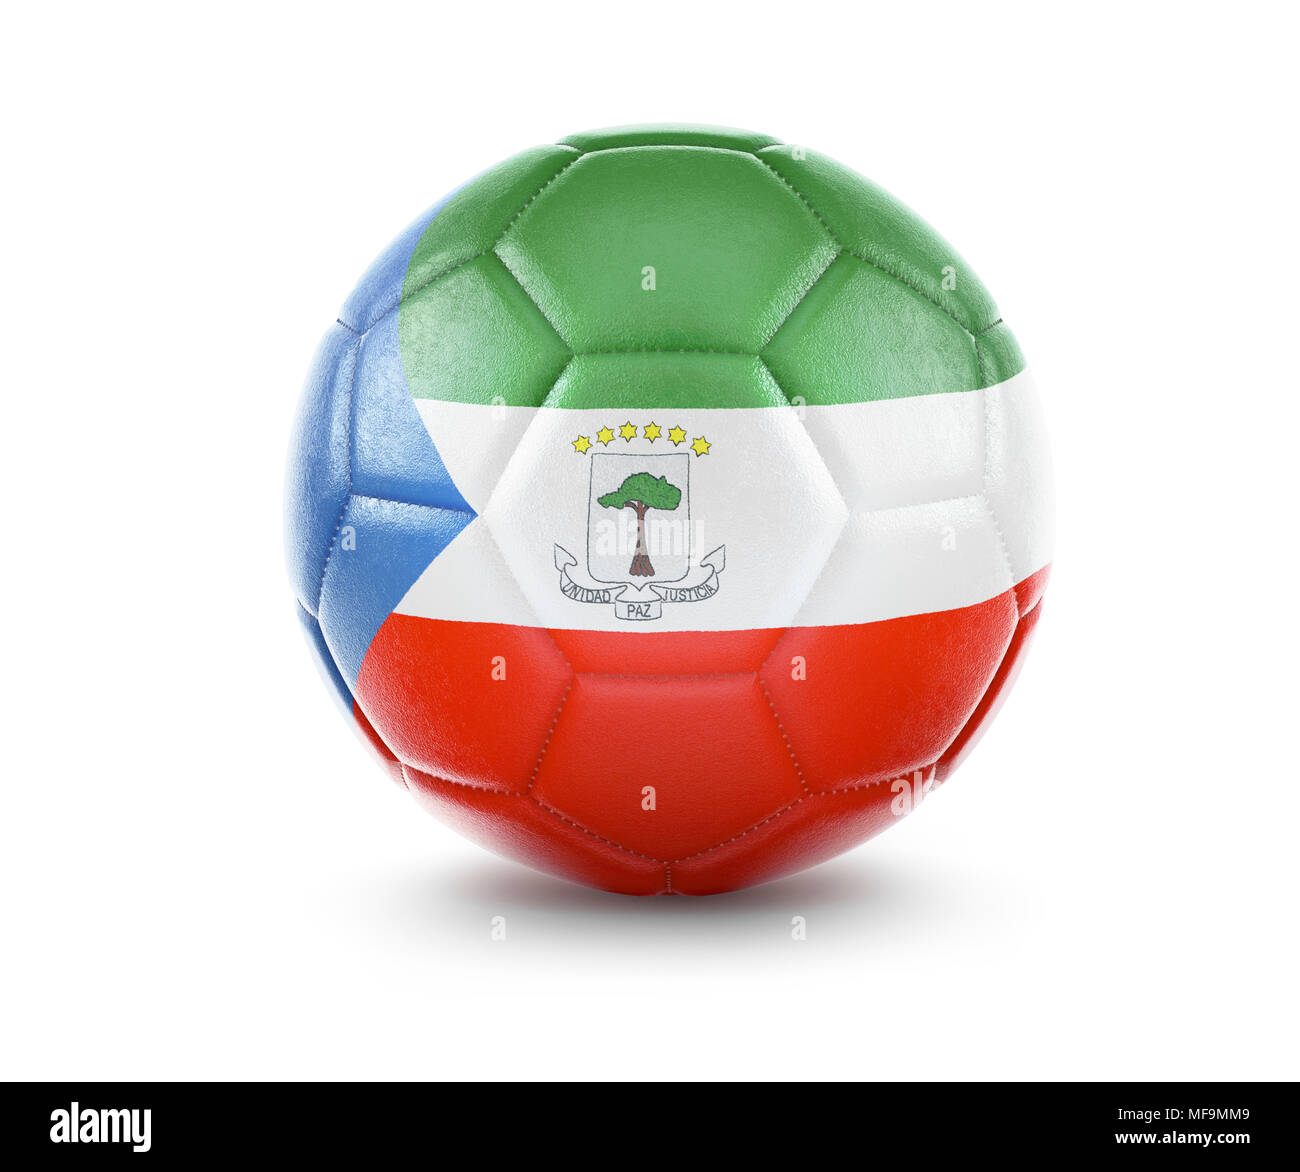 High qualitiy rendering of a soccer ball with the flag of Equatorial Guinea.(series) Stock Photo